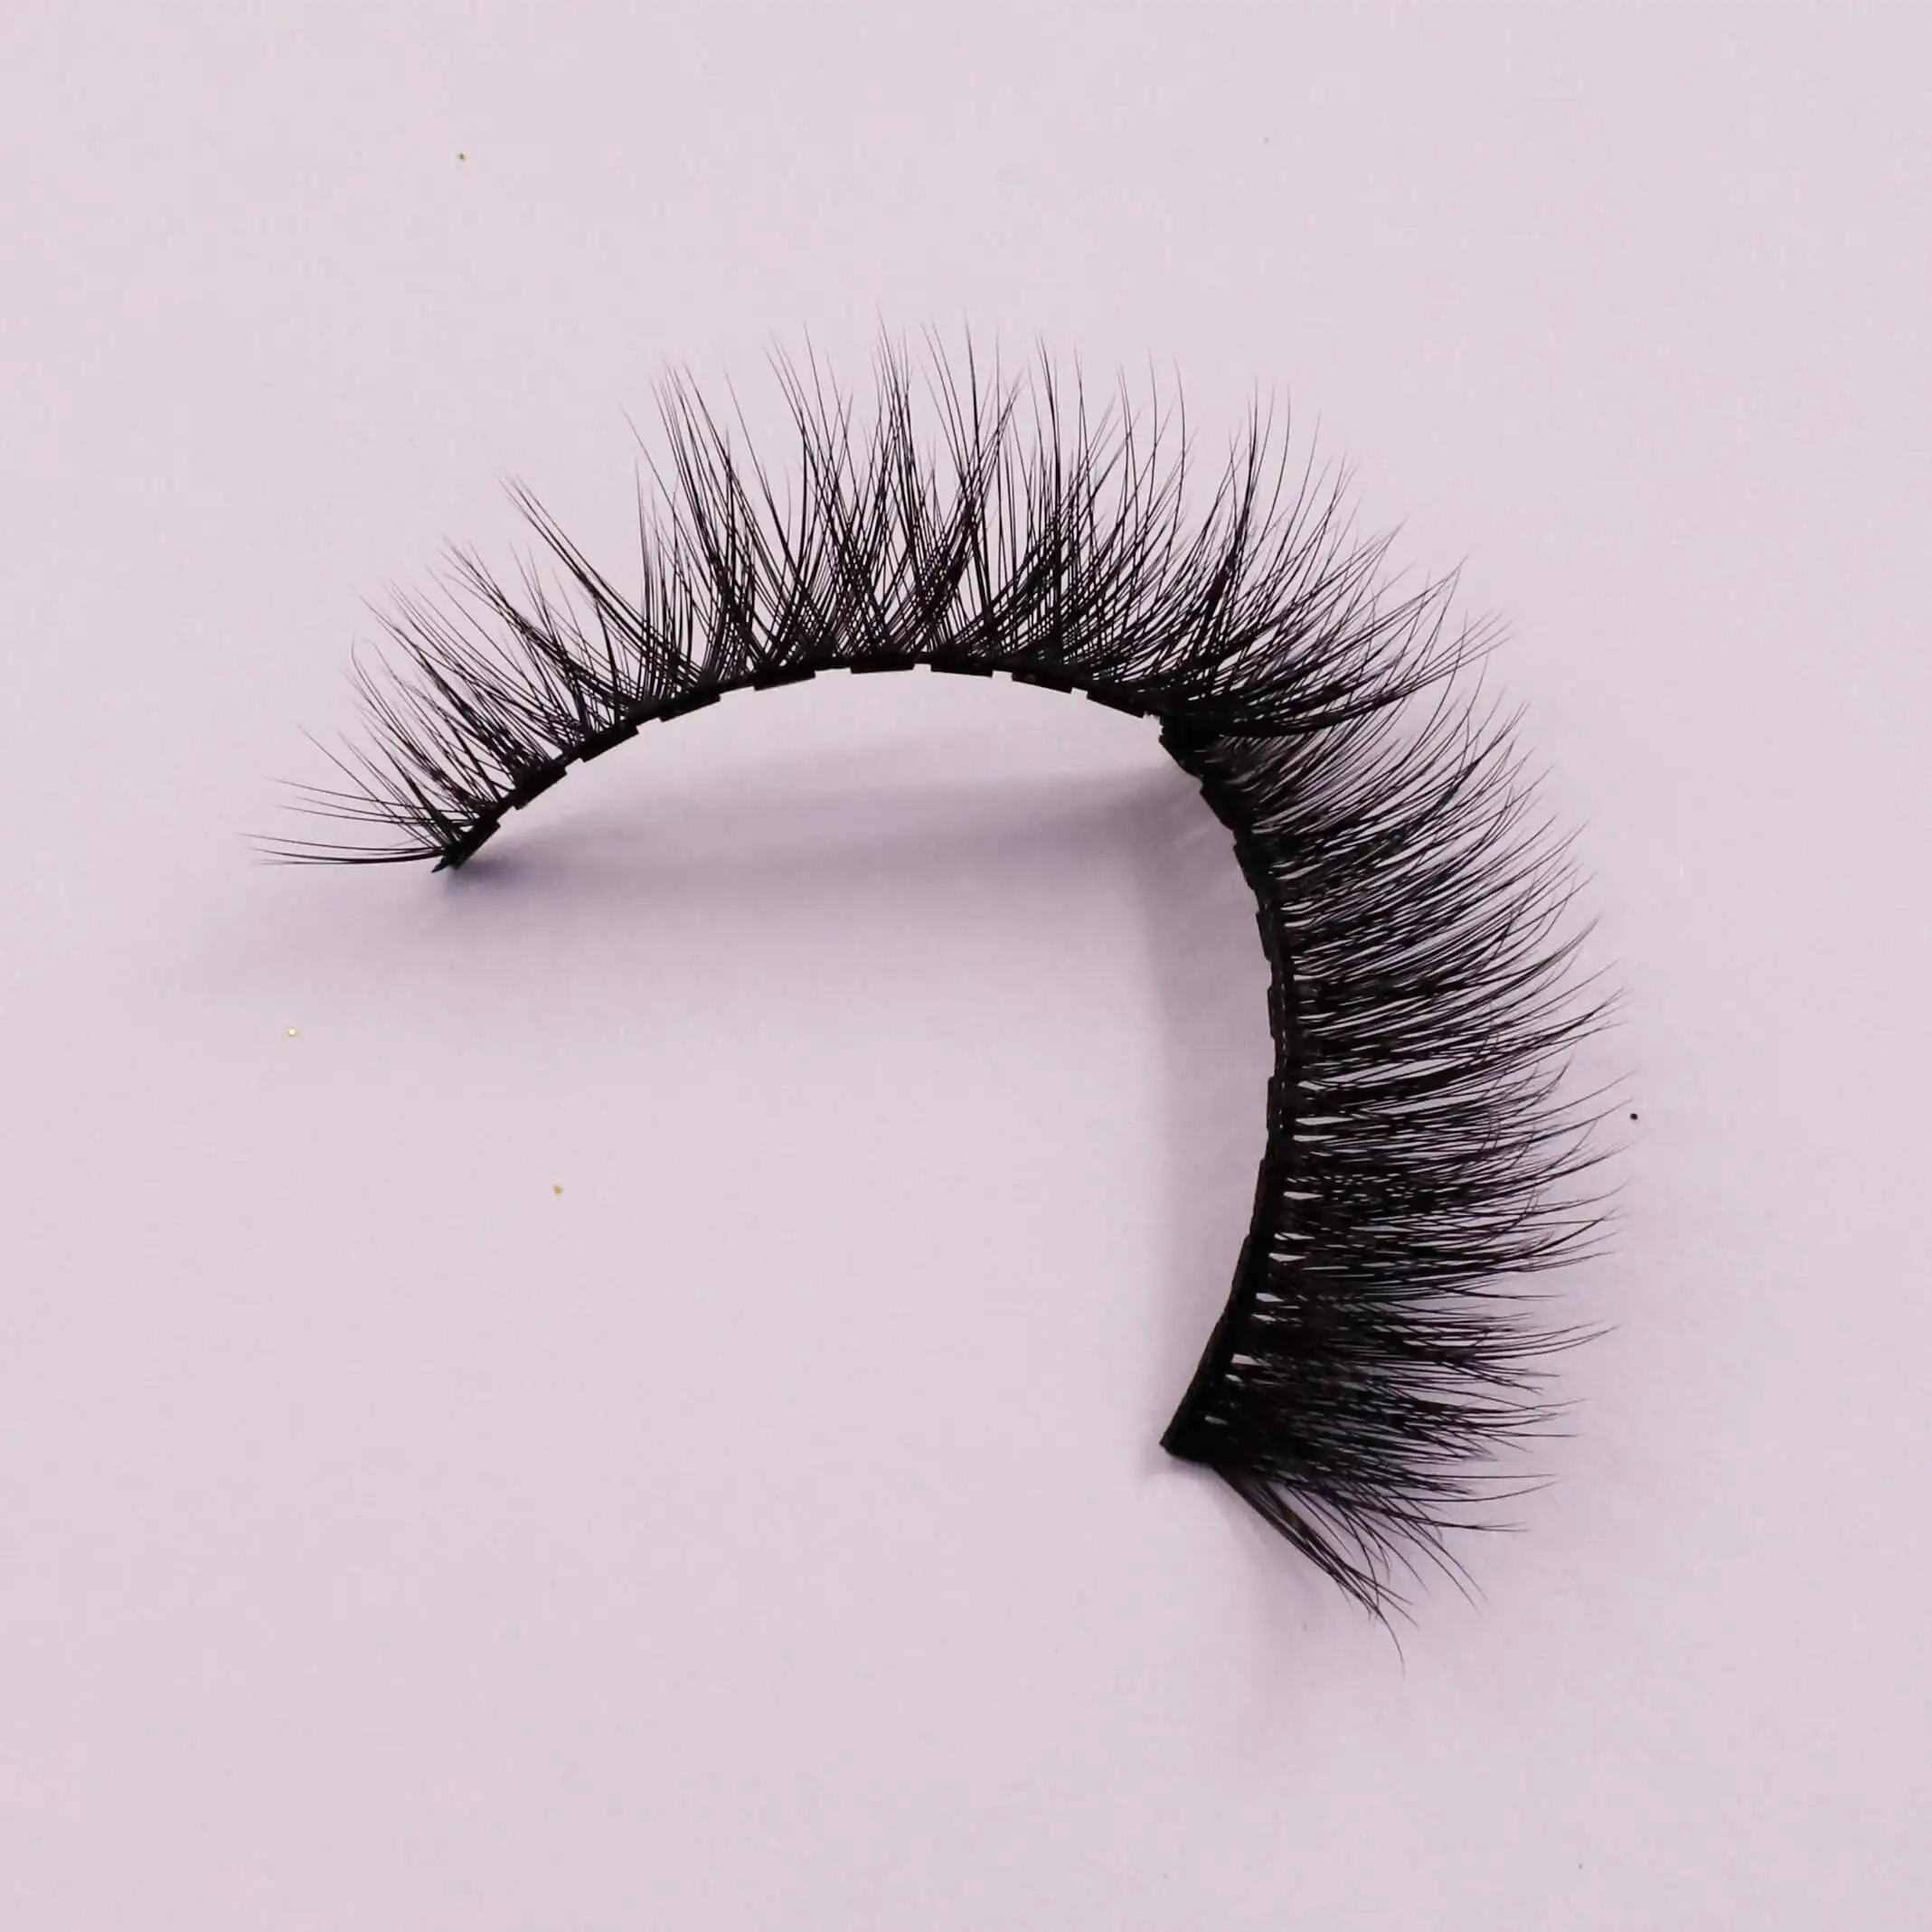 100% Handmade 3D Magnetic Eyelashes with 3 Magnets Magnetic Lashes Natural False Eyelashes Magnetic Lashes